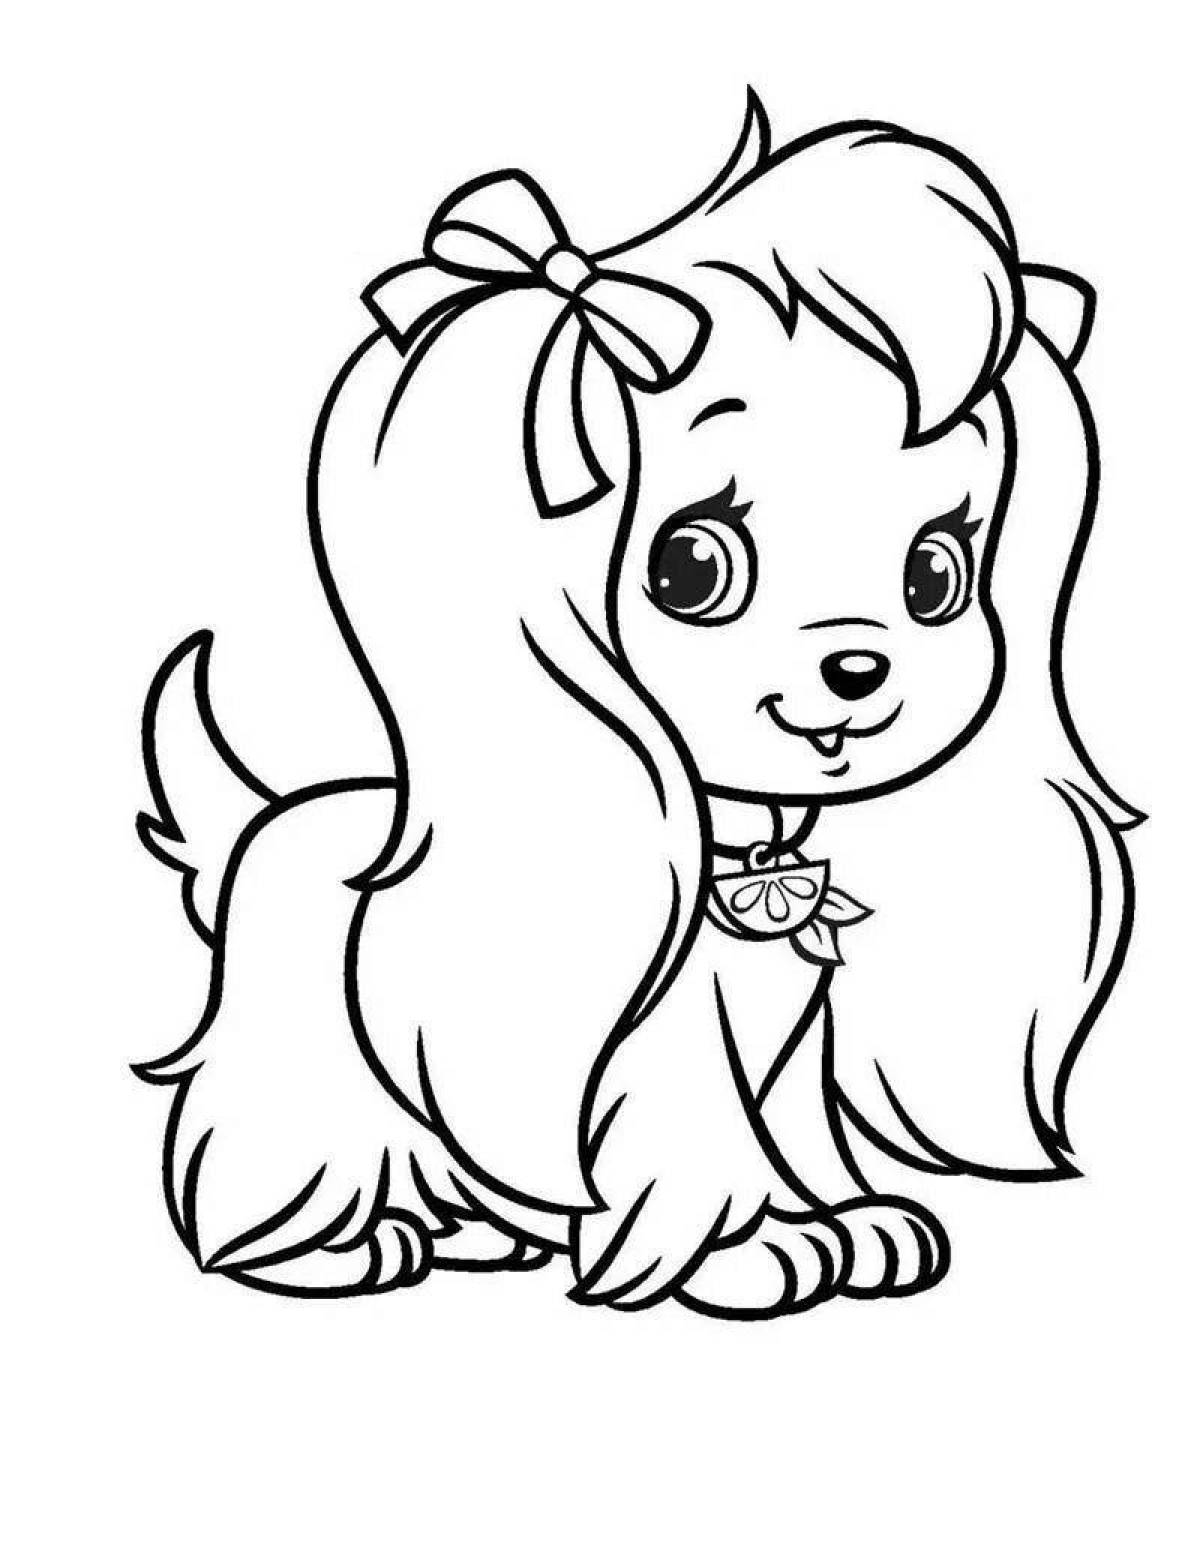 Animated coloring for children 5-6 years old for girls animals